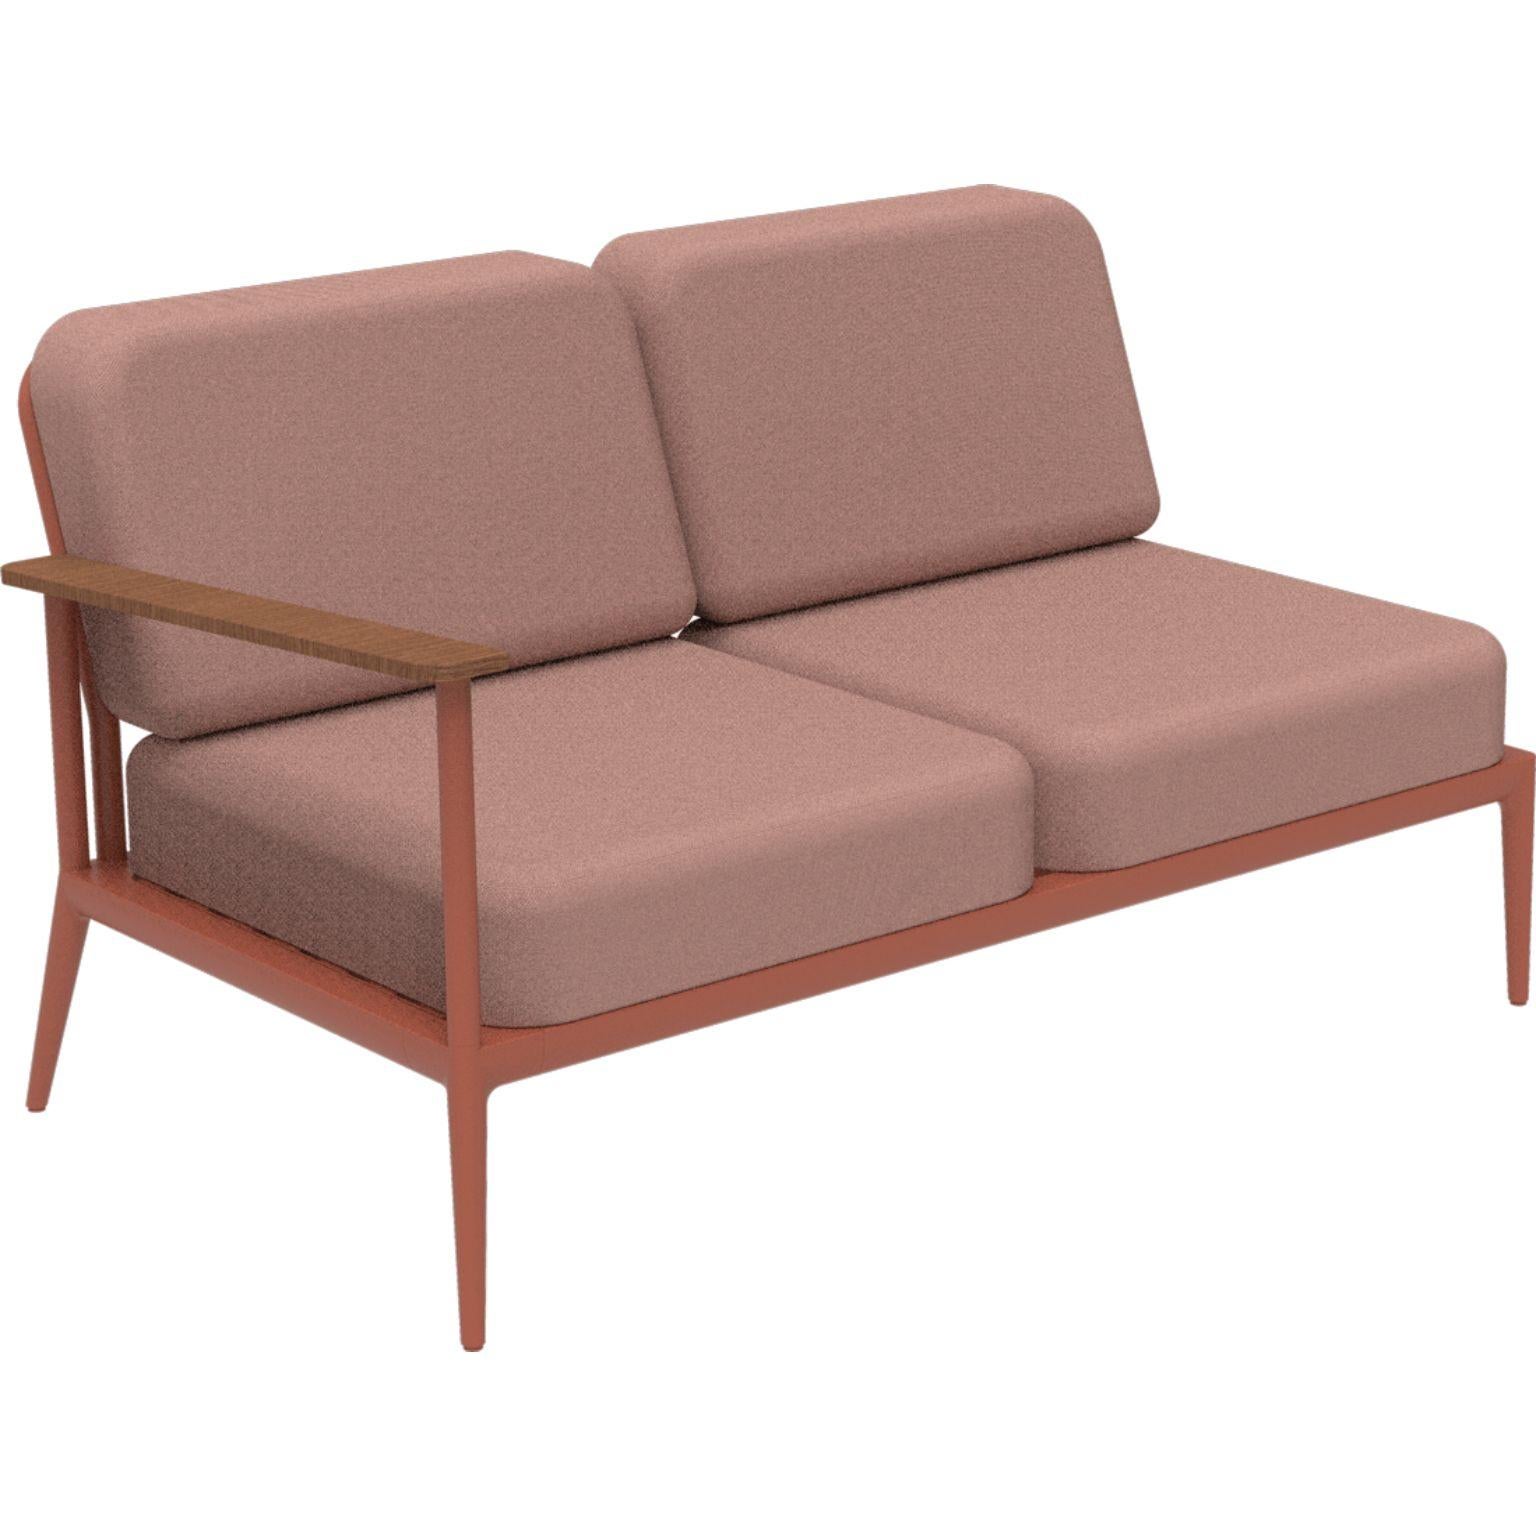 Nature Salmon Double Right modular sofa by MOWEE
Dimensions: D85 x W144 x H81 cm (seat height 42 cm).
Material: Aluminum, upholstery and Iroko Wood.
Weight: 29 kg.
Also available in different colors and finishes.

An unmistakable collection